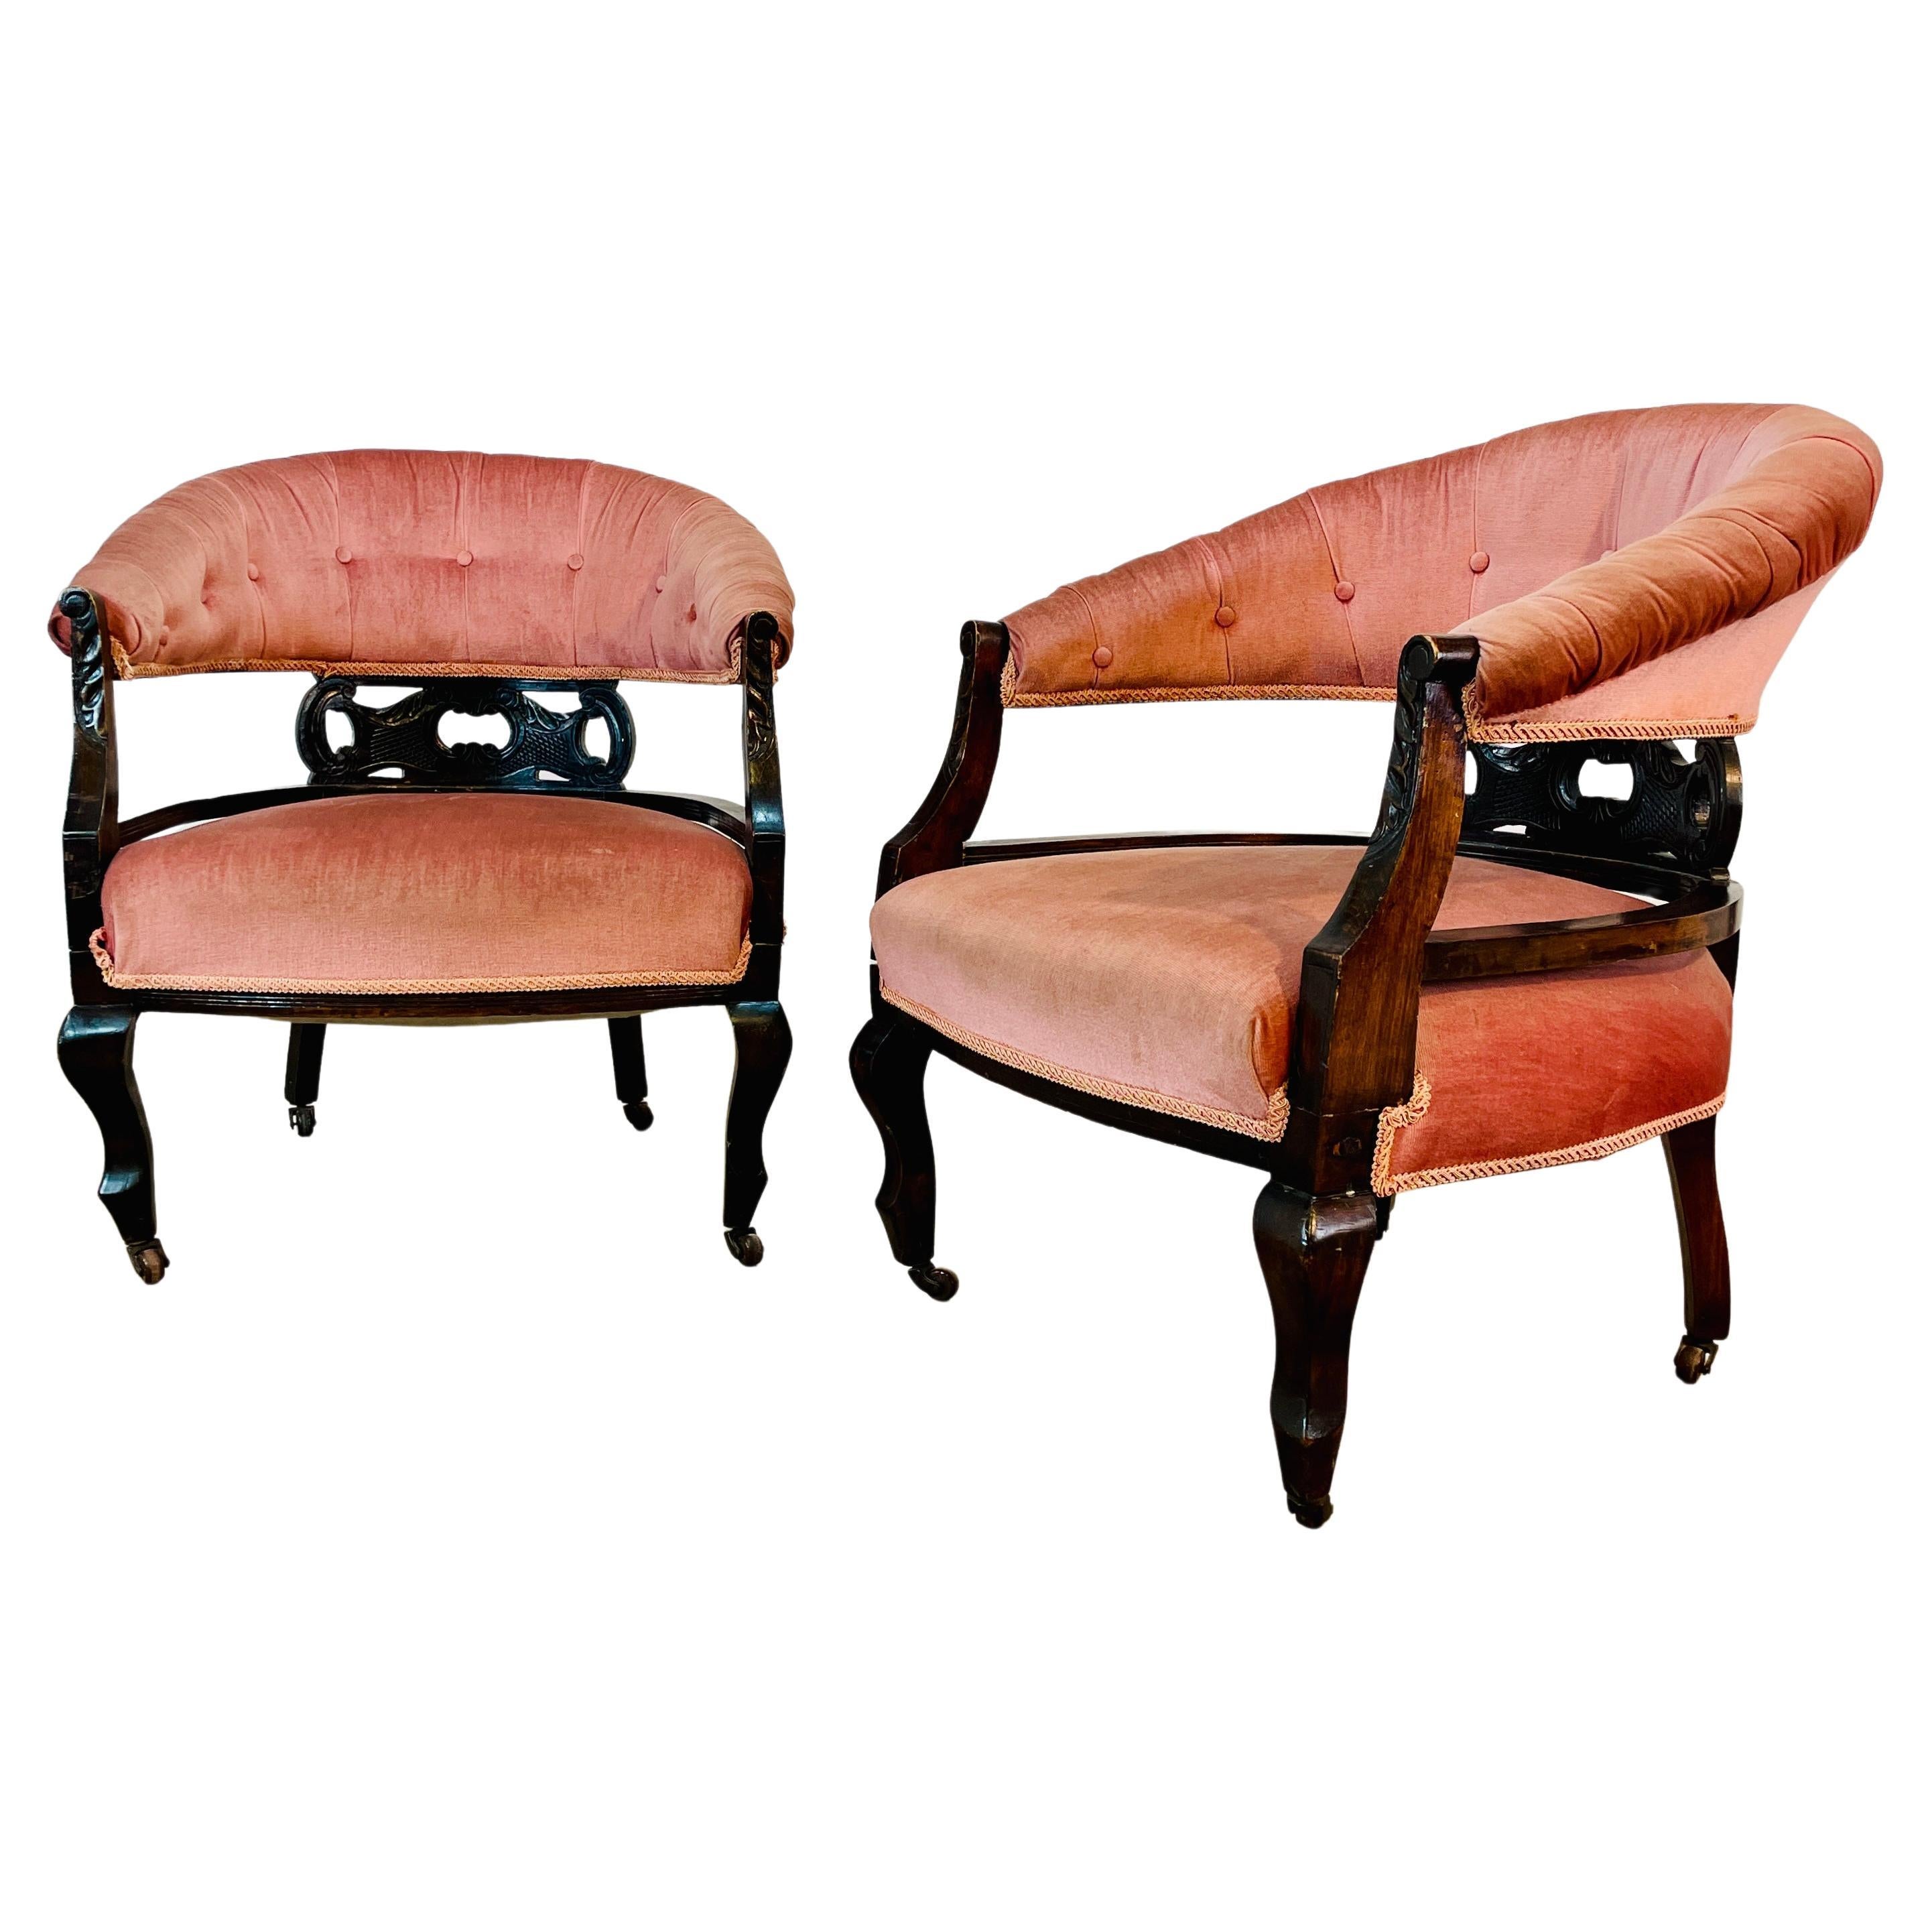 Antique English Edwardian Low Open Armchairs, Set of 2, circa 1900s For Sale